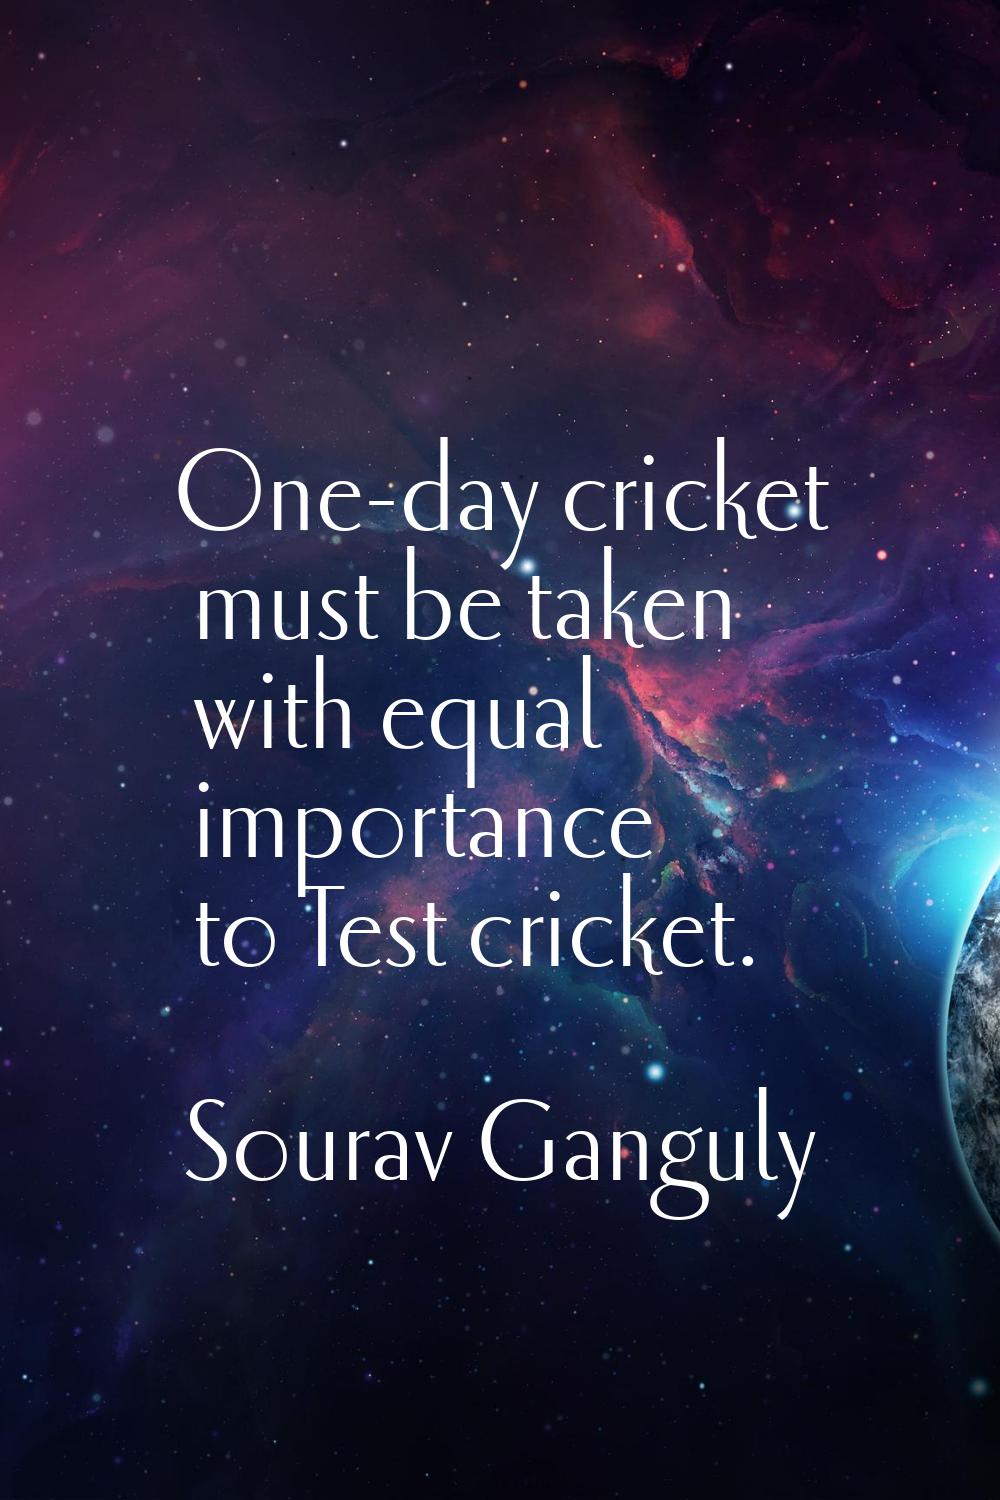 One-day cricket must be taken with equal importance to Test cricket.